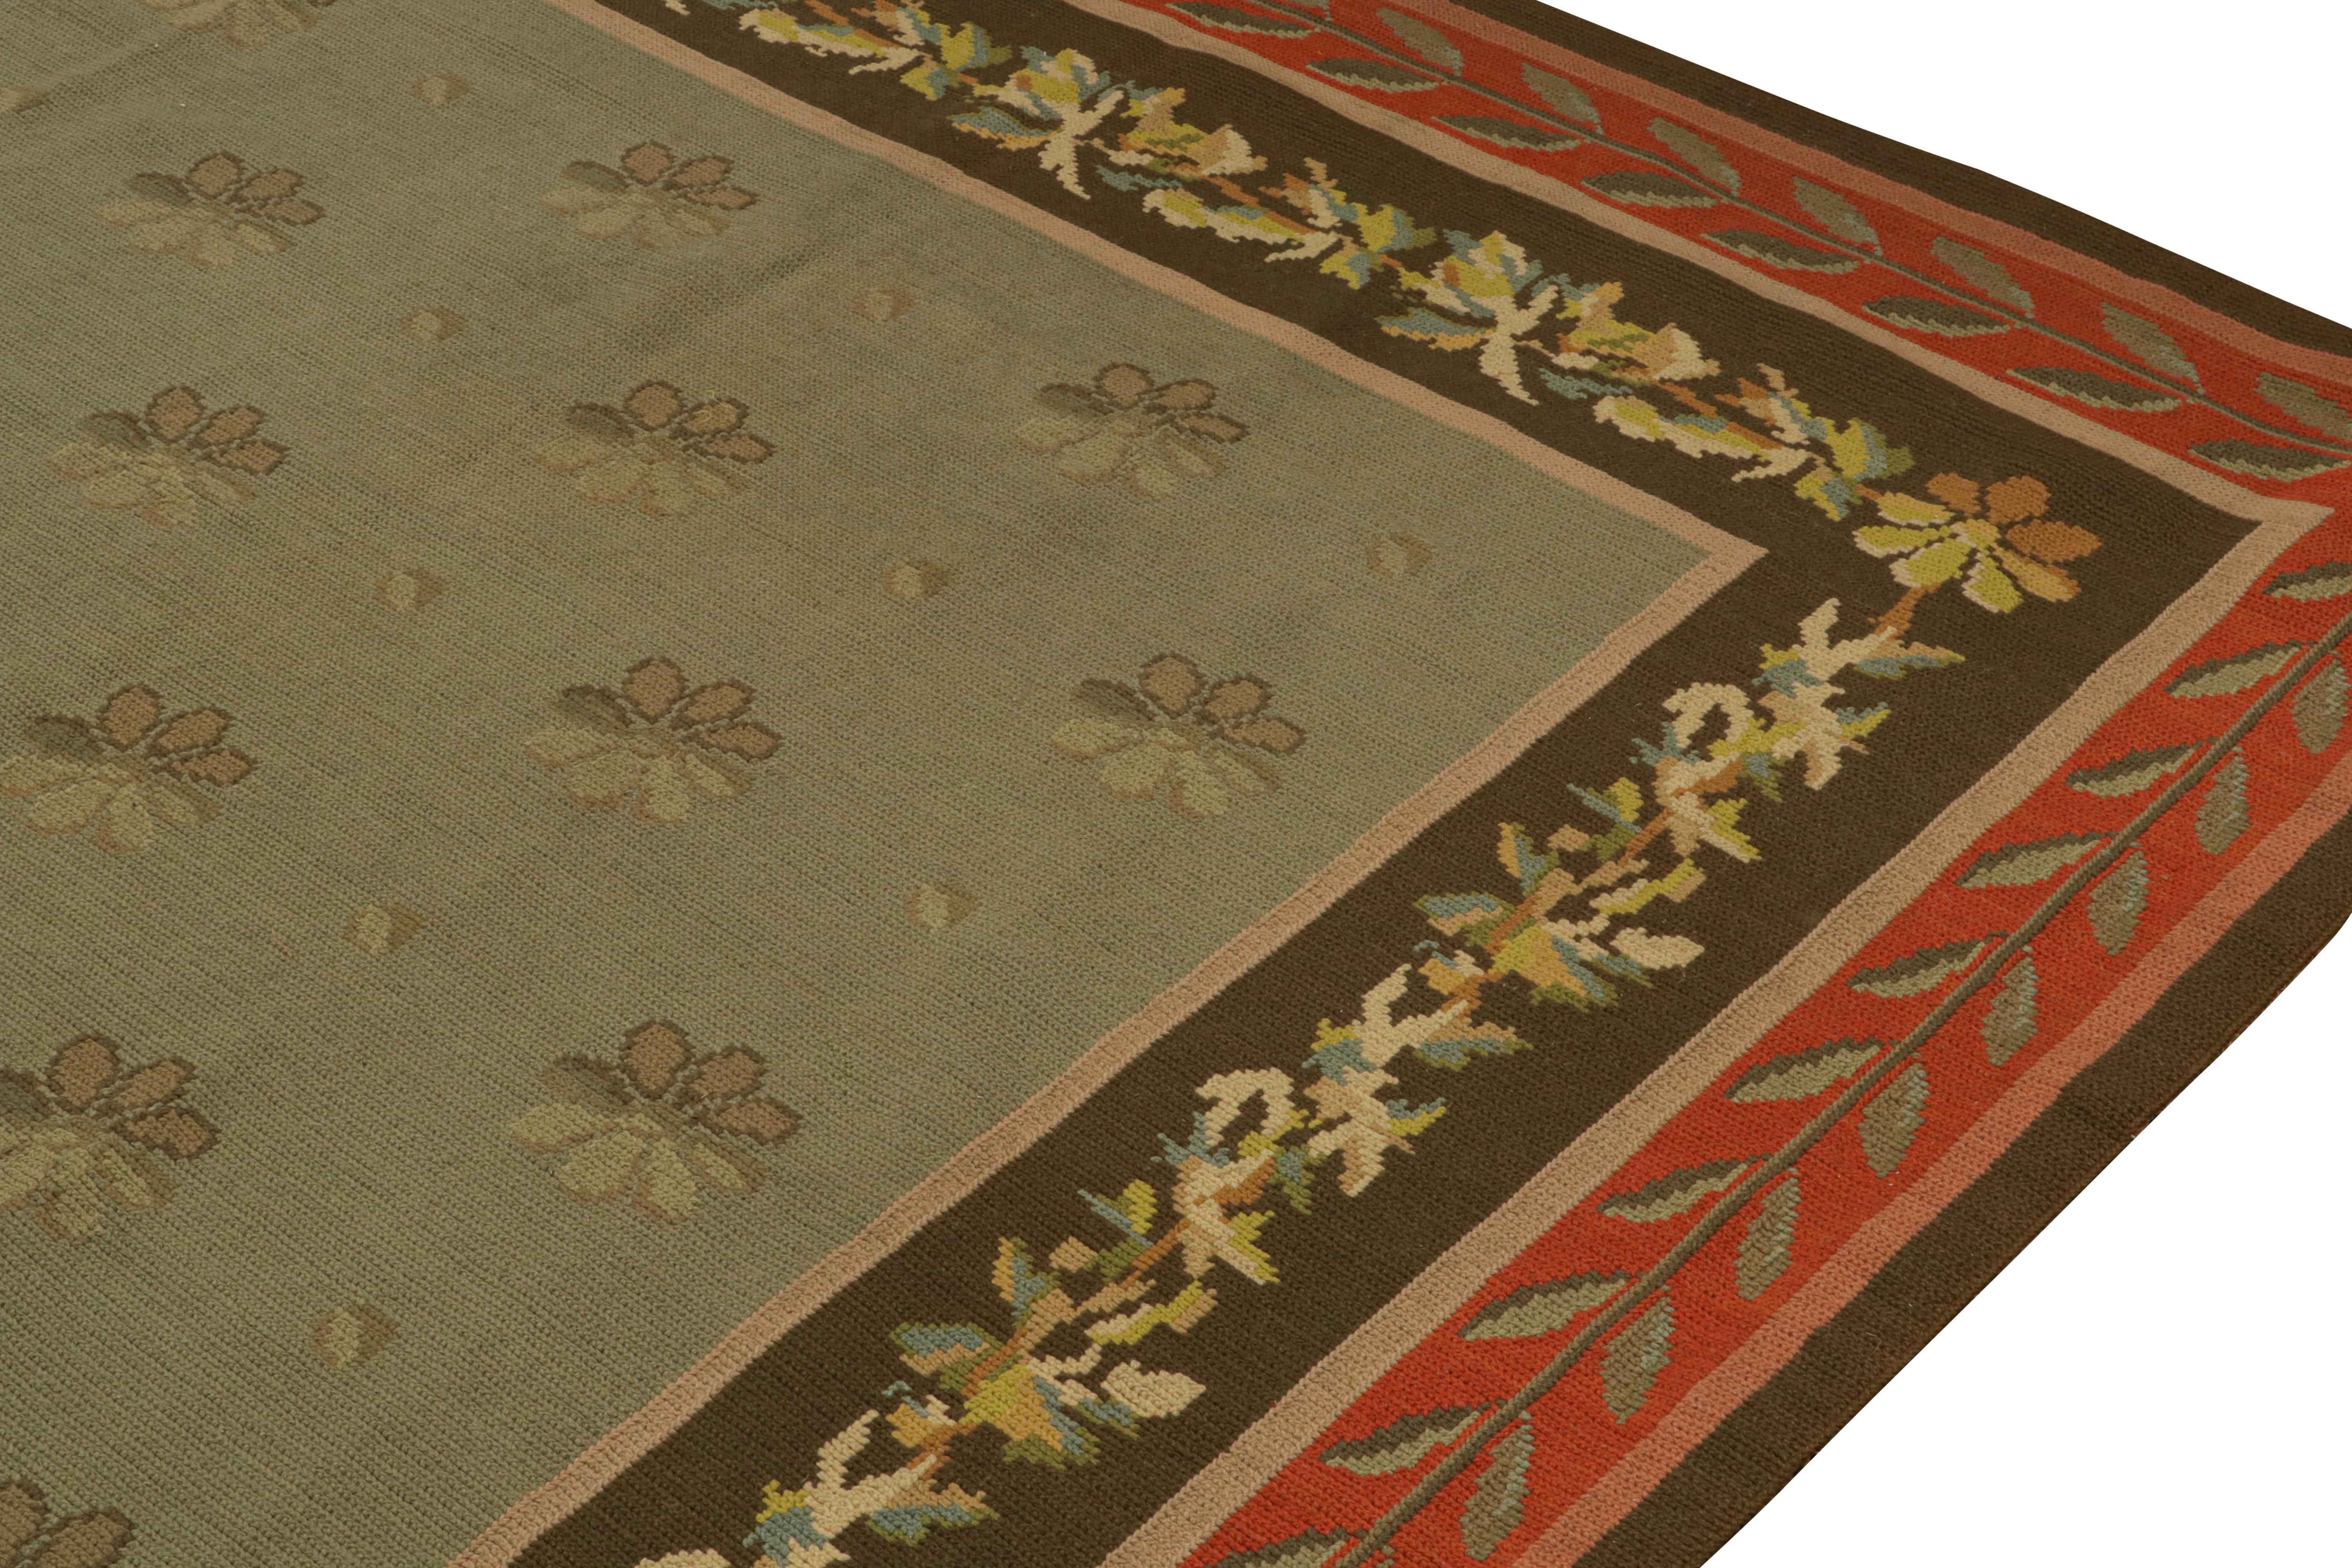 Hand-Knotted Antique Arraiolos Needlepoint Rug in Olive Green with Florals, from Rug & Kilim For Sale